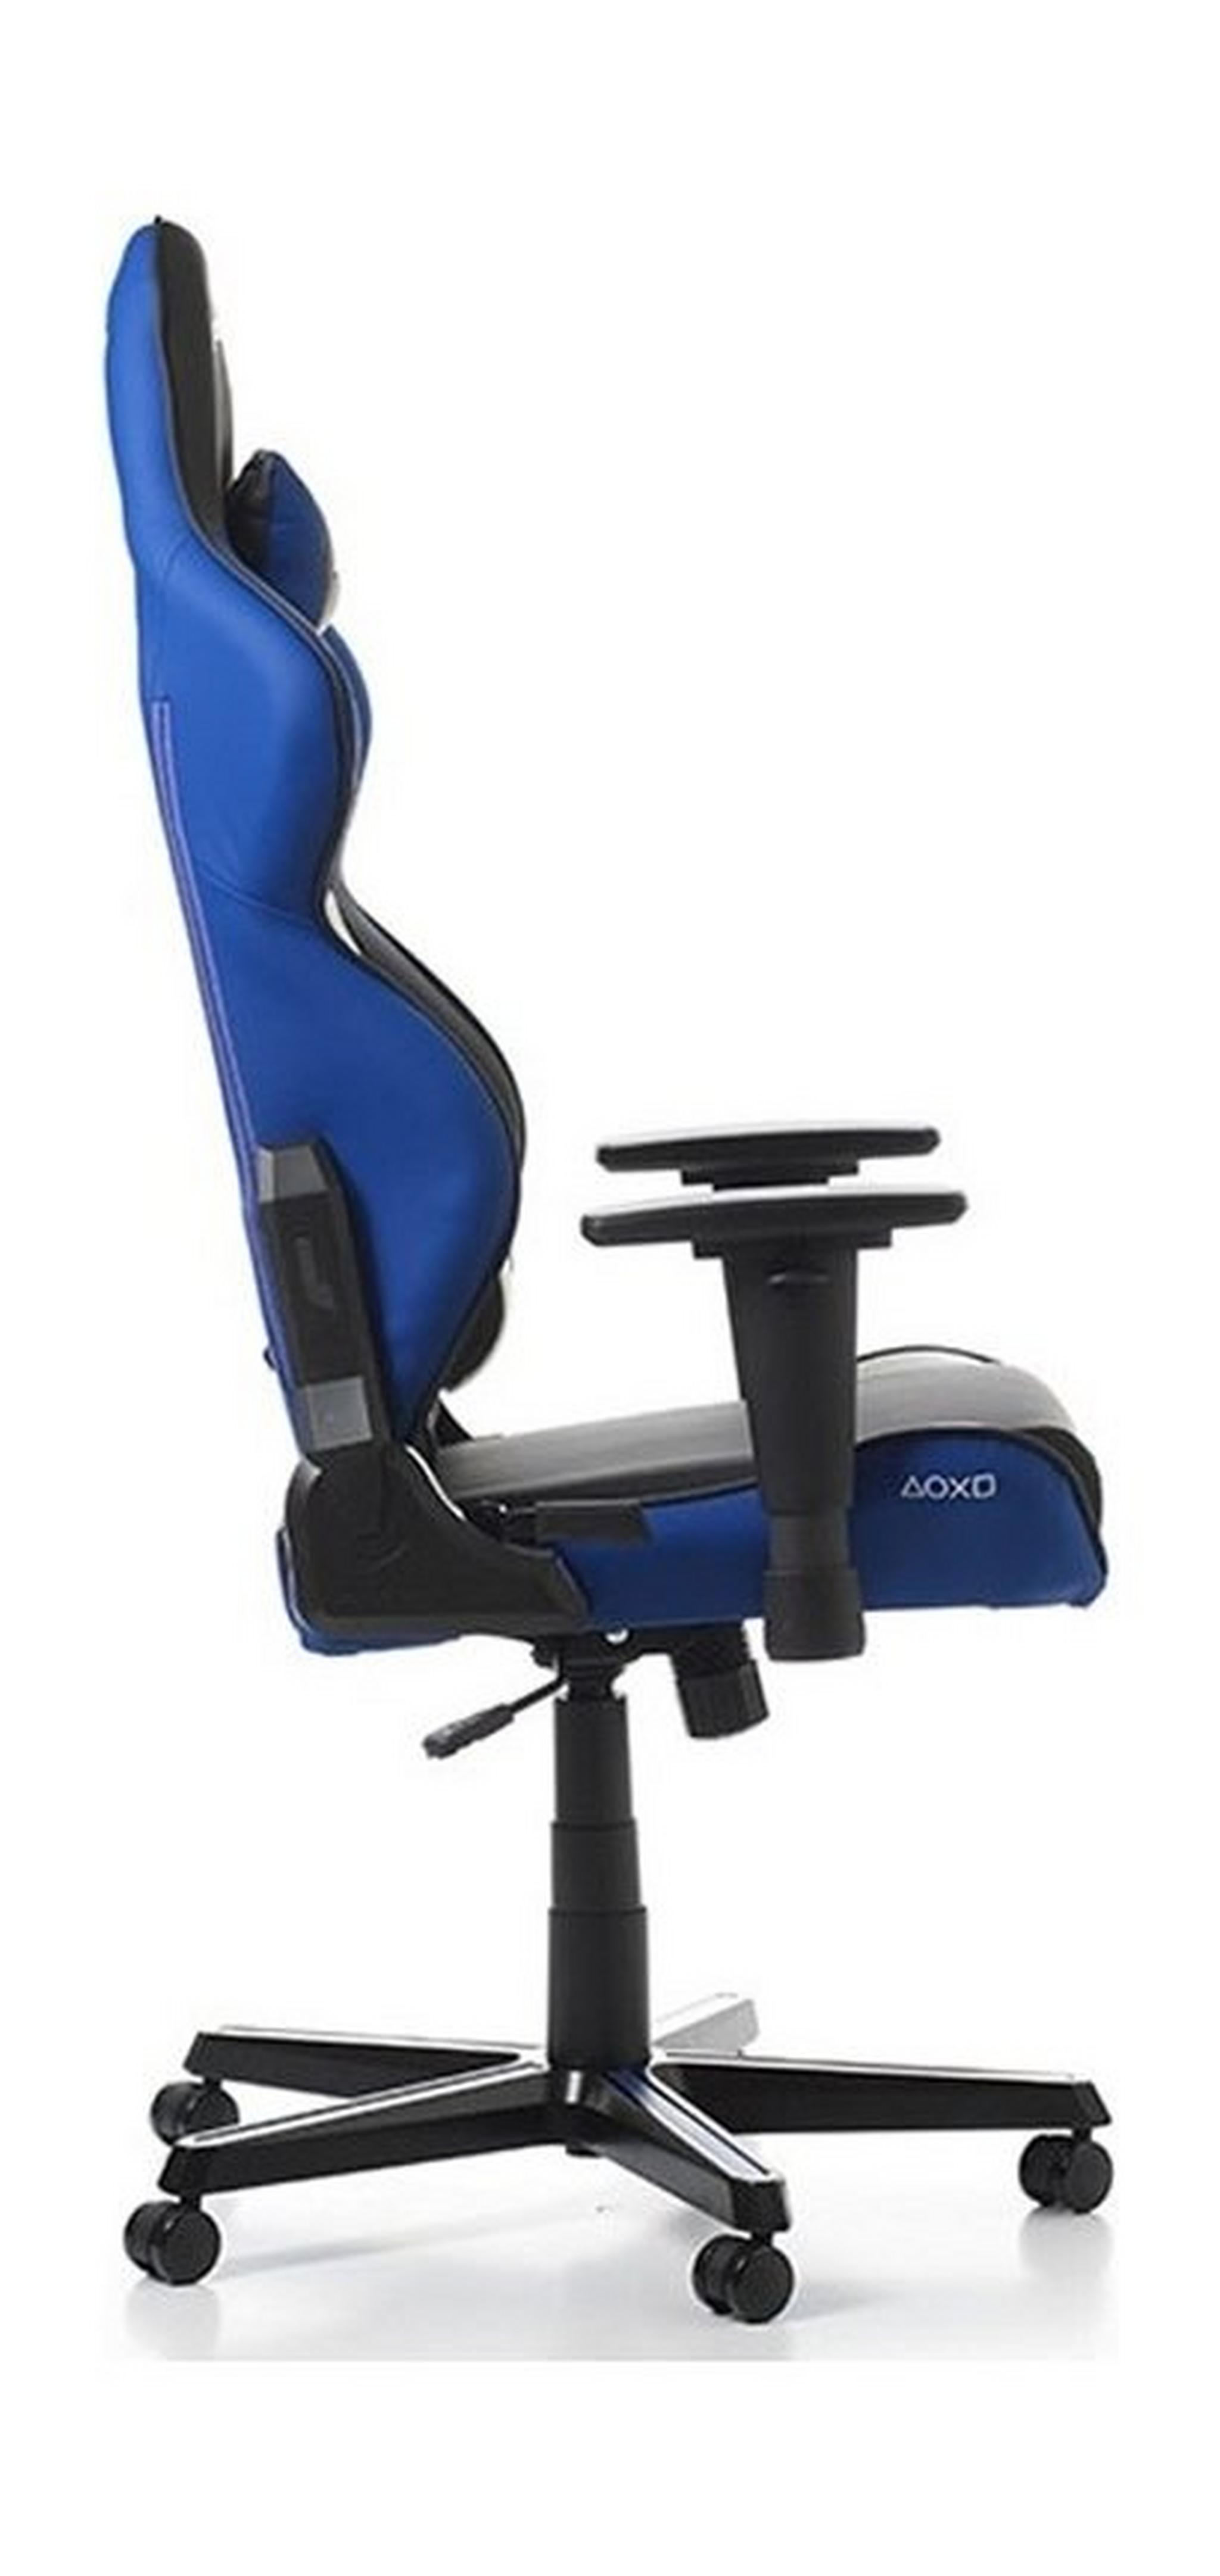 DXRacer Racing Series Gaming Chair - PlayStation Edition